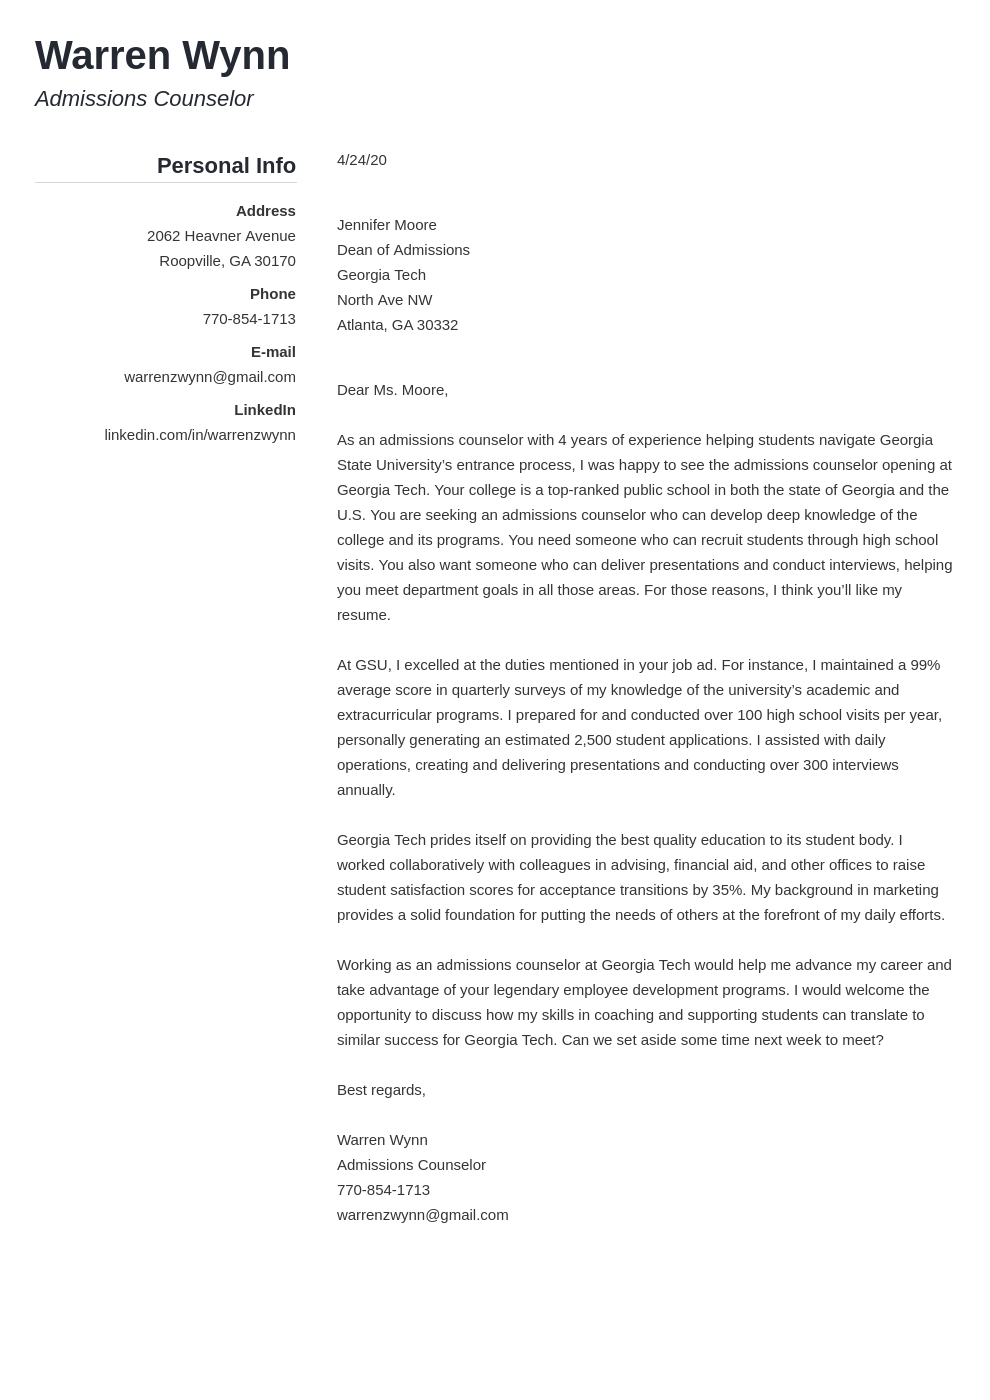 Admissions Counselor Cover Letter Examples &amp; Writing Guide within Letter Of Counseling Template